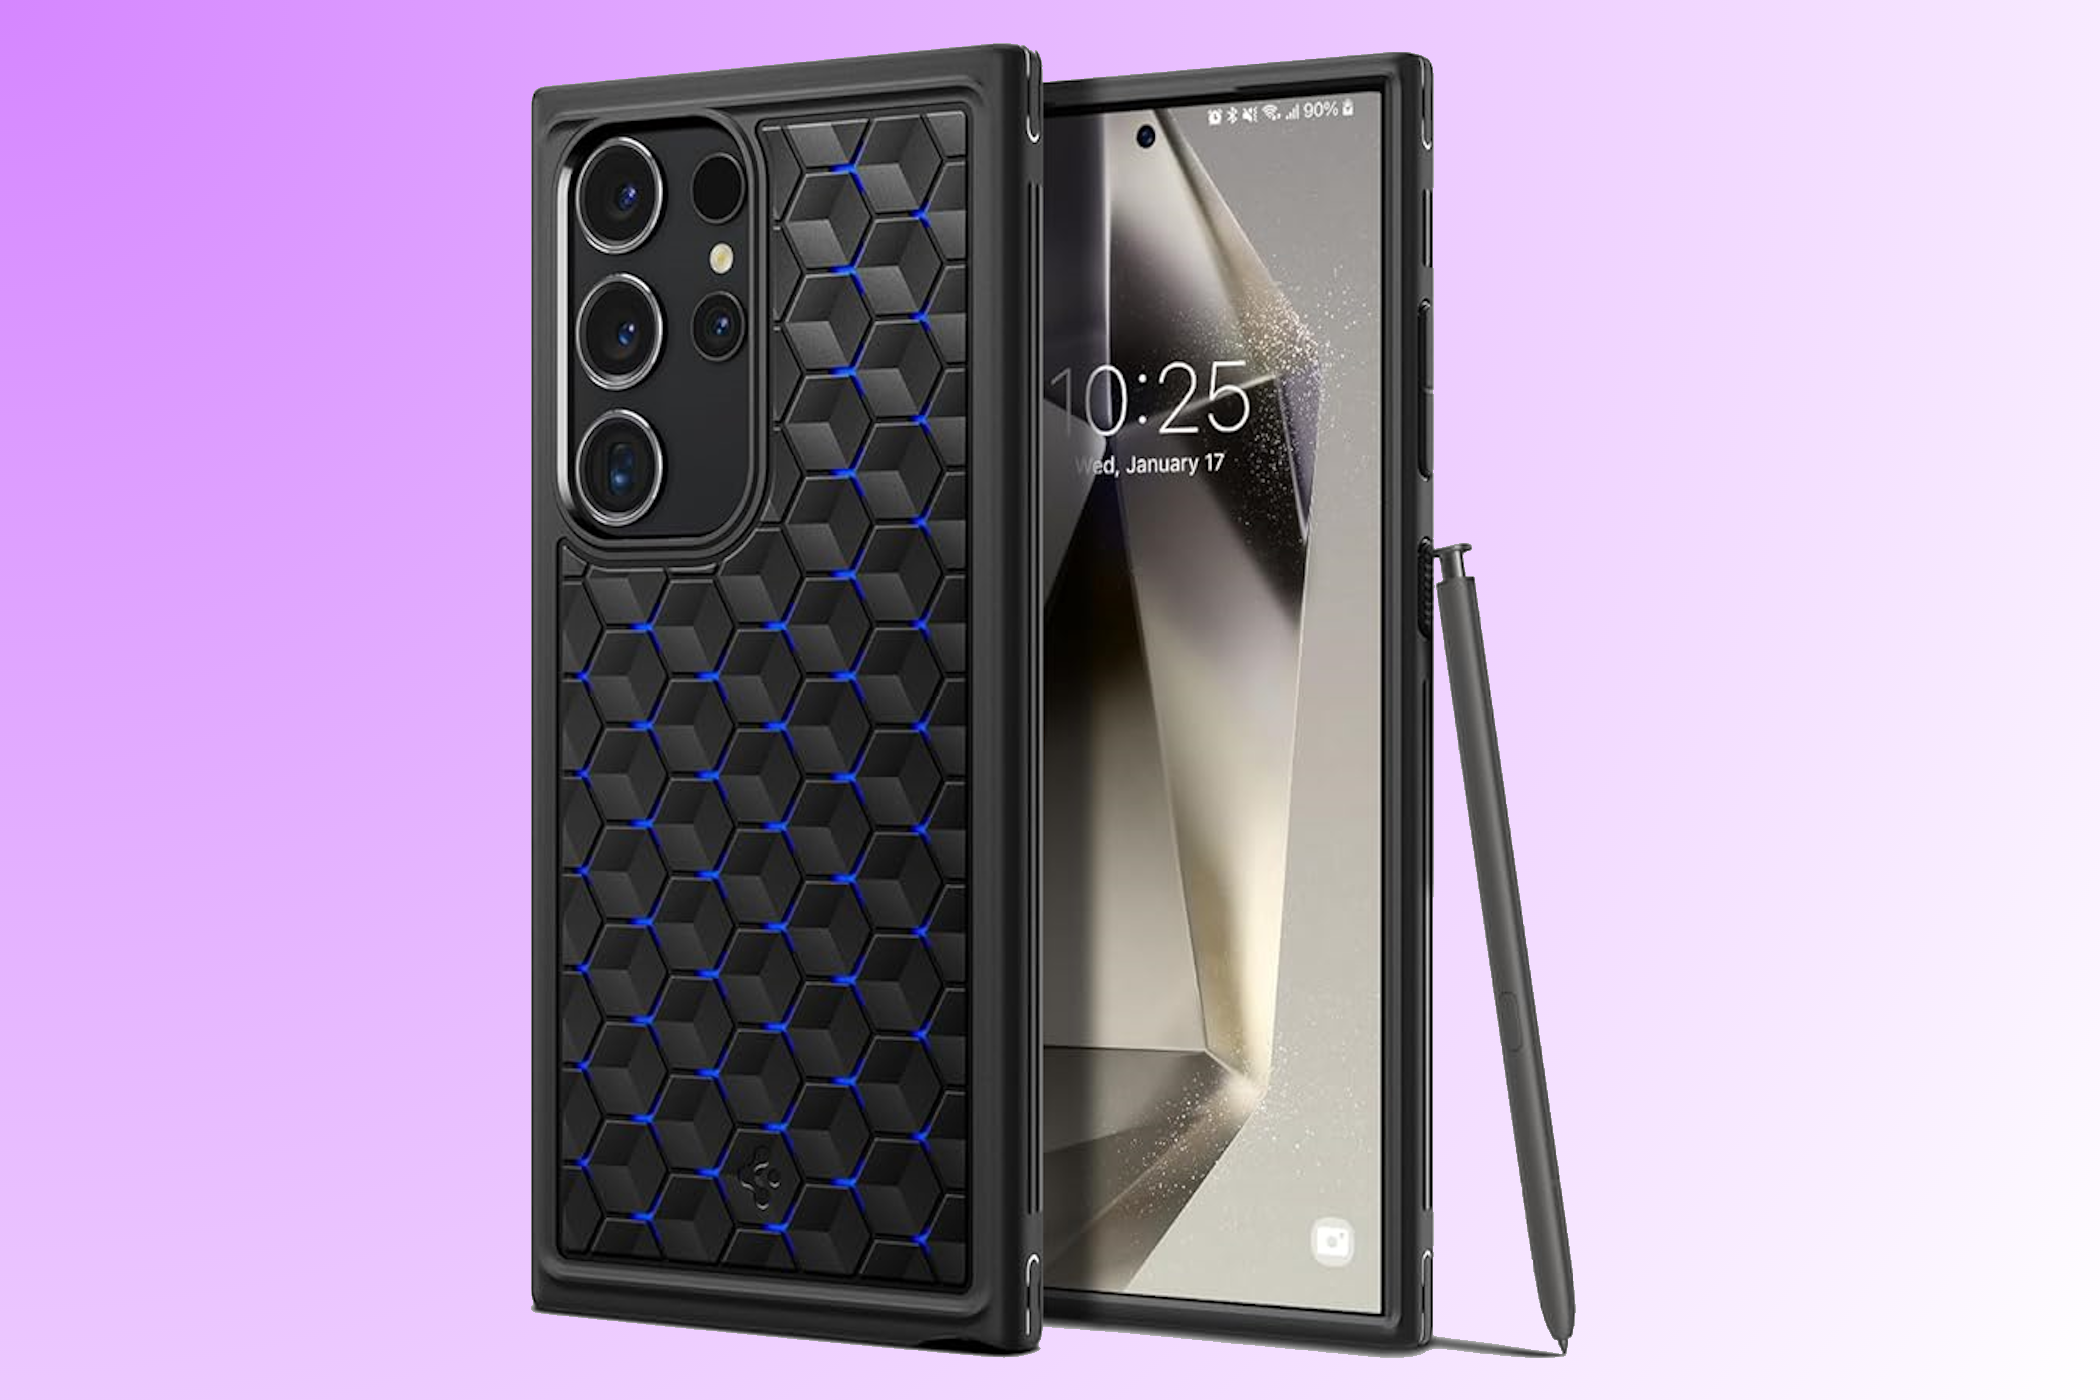 Stay Cool with the Spigen Cryo Armor Case for the Samsung Galaxy